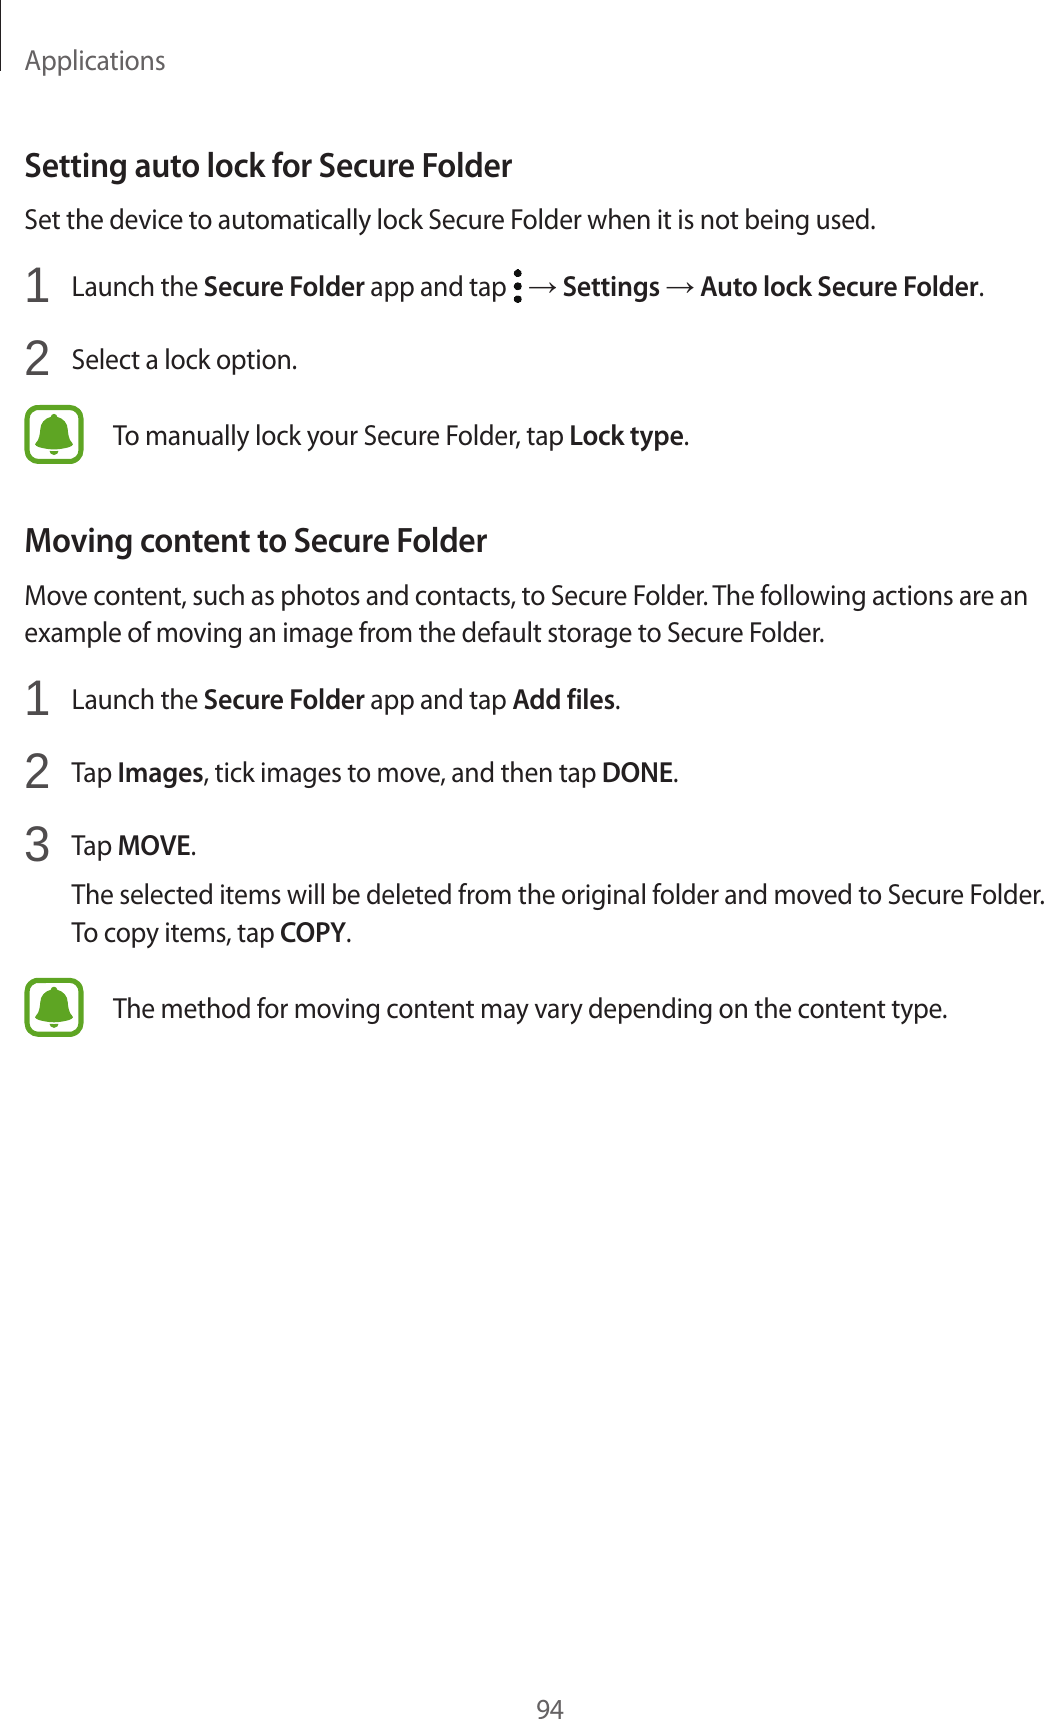 Applications94Setting auto lock for Secure FolderSet the device to automatically lock Secure Folder when it is not being used.1  Launch the Secure Folder app and tap   → Settings → Auto lock Secure Folder.2  Select a lock option.To manually lock your Secure Folder, tap Lock type.Moving content to Secure FolderMove content, such as photos and contacts, to Secure Folder. The following actions are an example of moving an image from the default storage to Secure Folder.1  Launch the Secure Folder app and tap Add files.2  Tap Images, tick images to move, and then tap DONE.3  Tap MOVE.The selected items will be deleted from the original folder and moved to Secure Folder. To copy items, tap COPY.The method for moving content may vary depending on the content type.